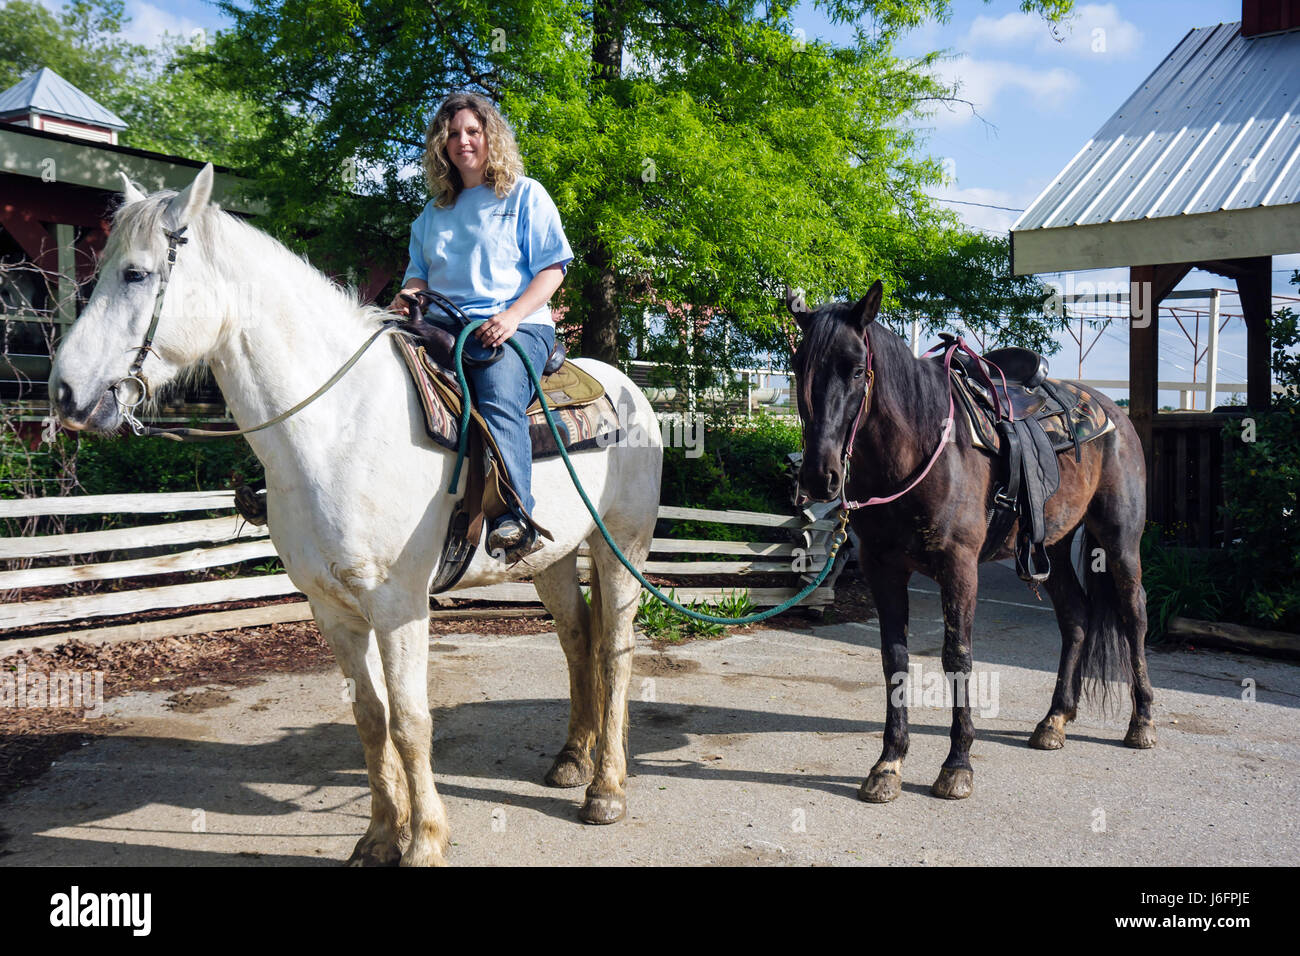 Sevierville Tennessee,Smoky Mountains,Five Oaks Riding Stables,horseback riding,woman female women,white,horse,animal,trail guide,working,work,employe Stock Photo